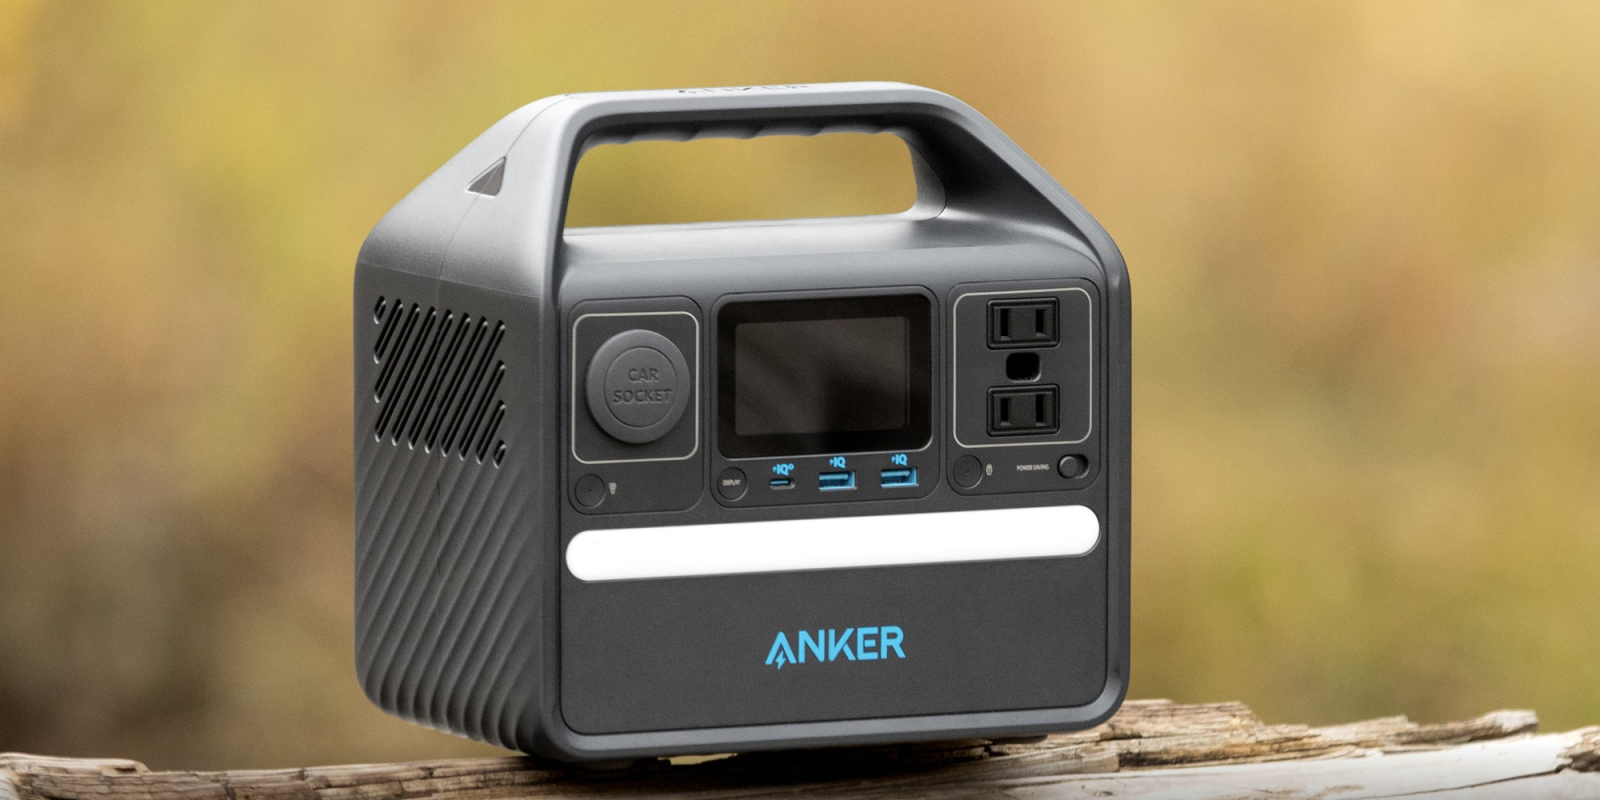 Anker-521-Portable-Power-Station-.png?w=1600